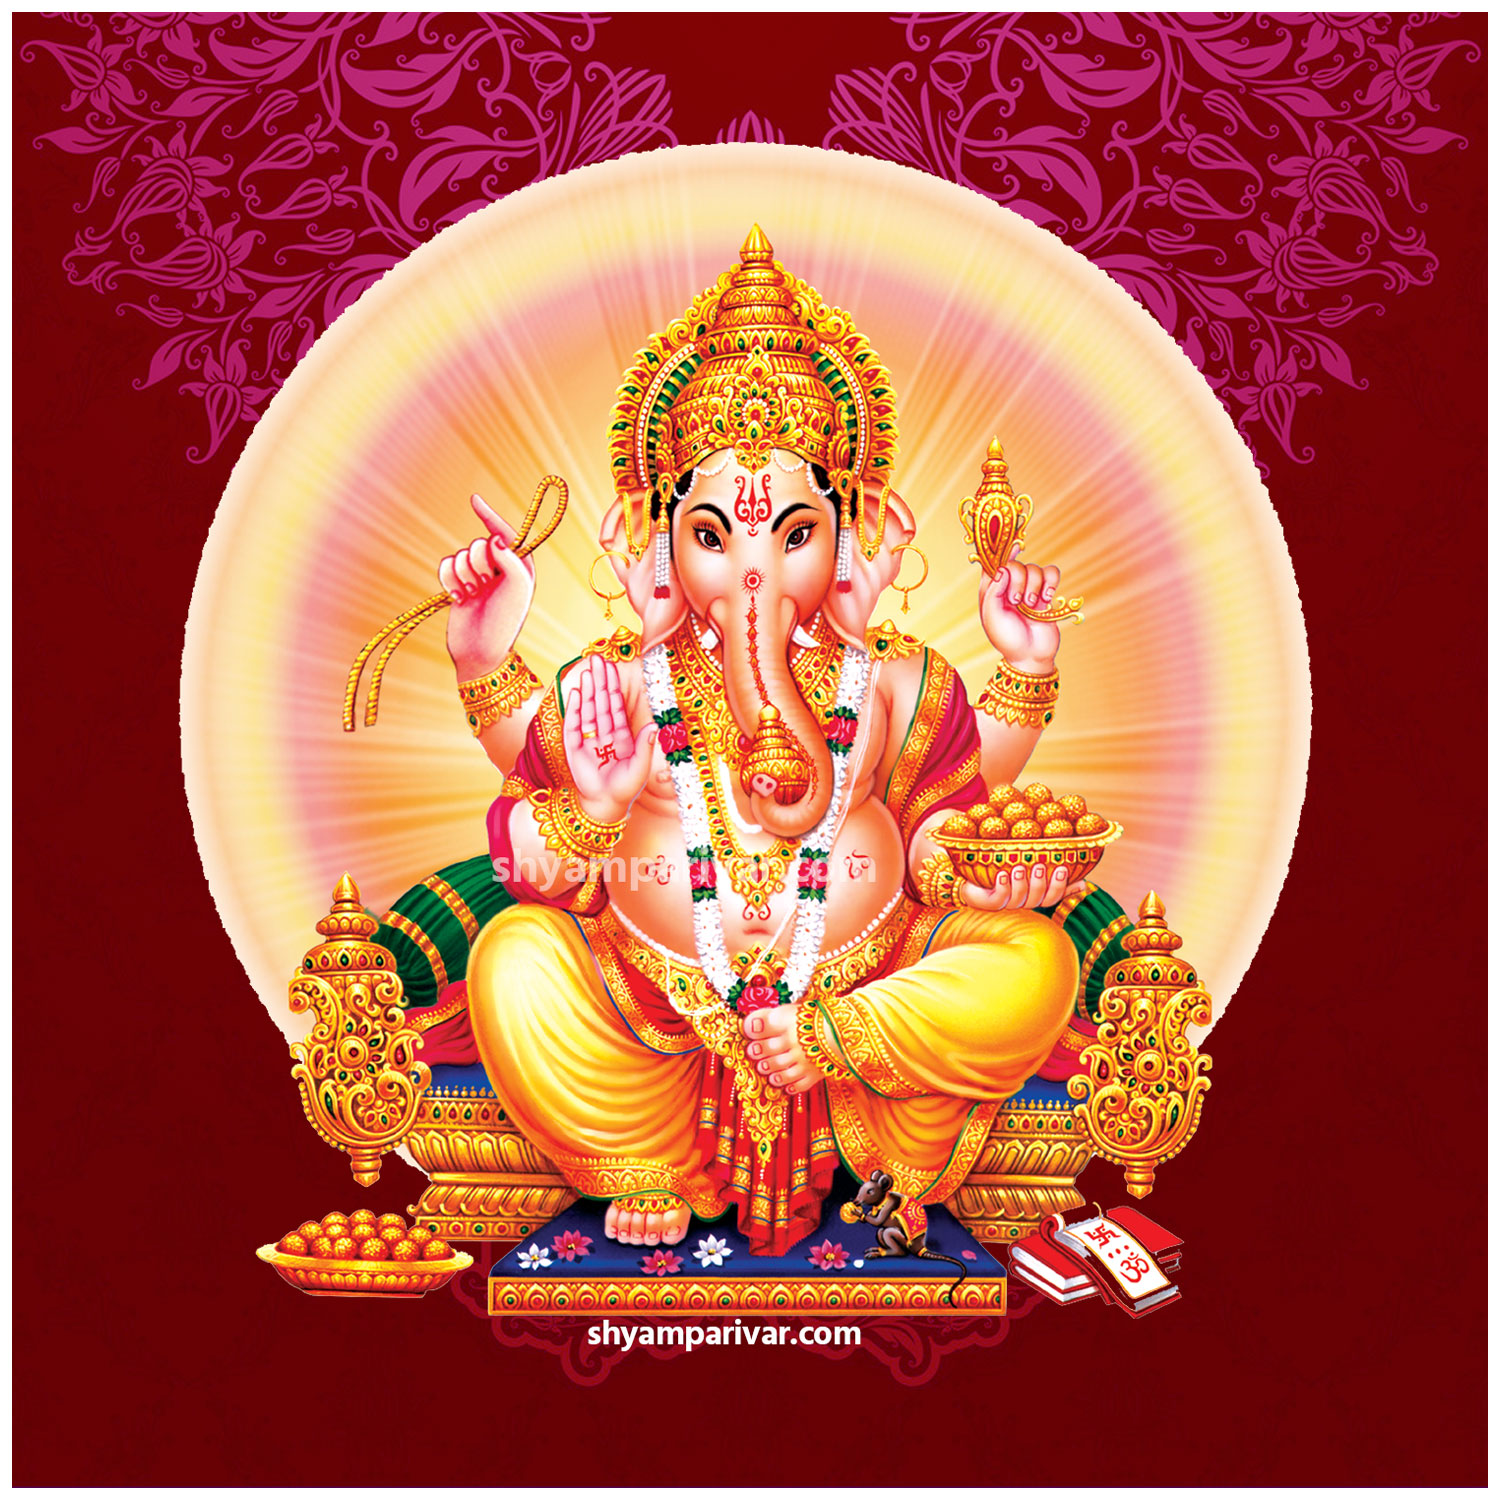 20 Most Beautiful Lord Ganesh Photo And Images 